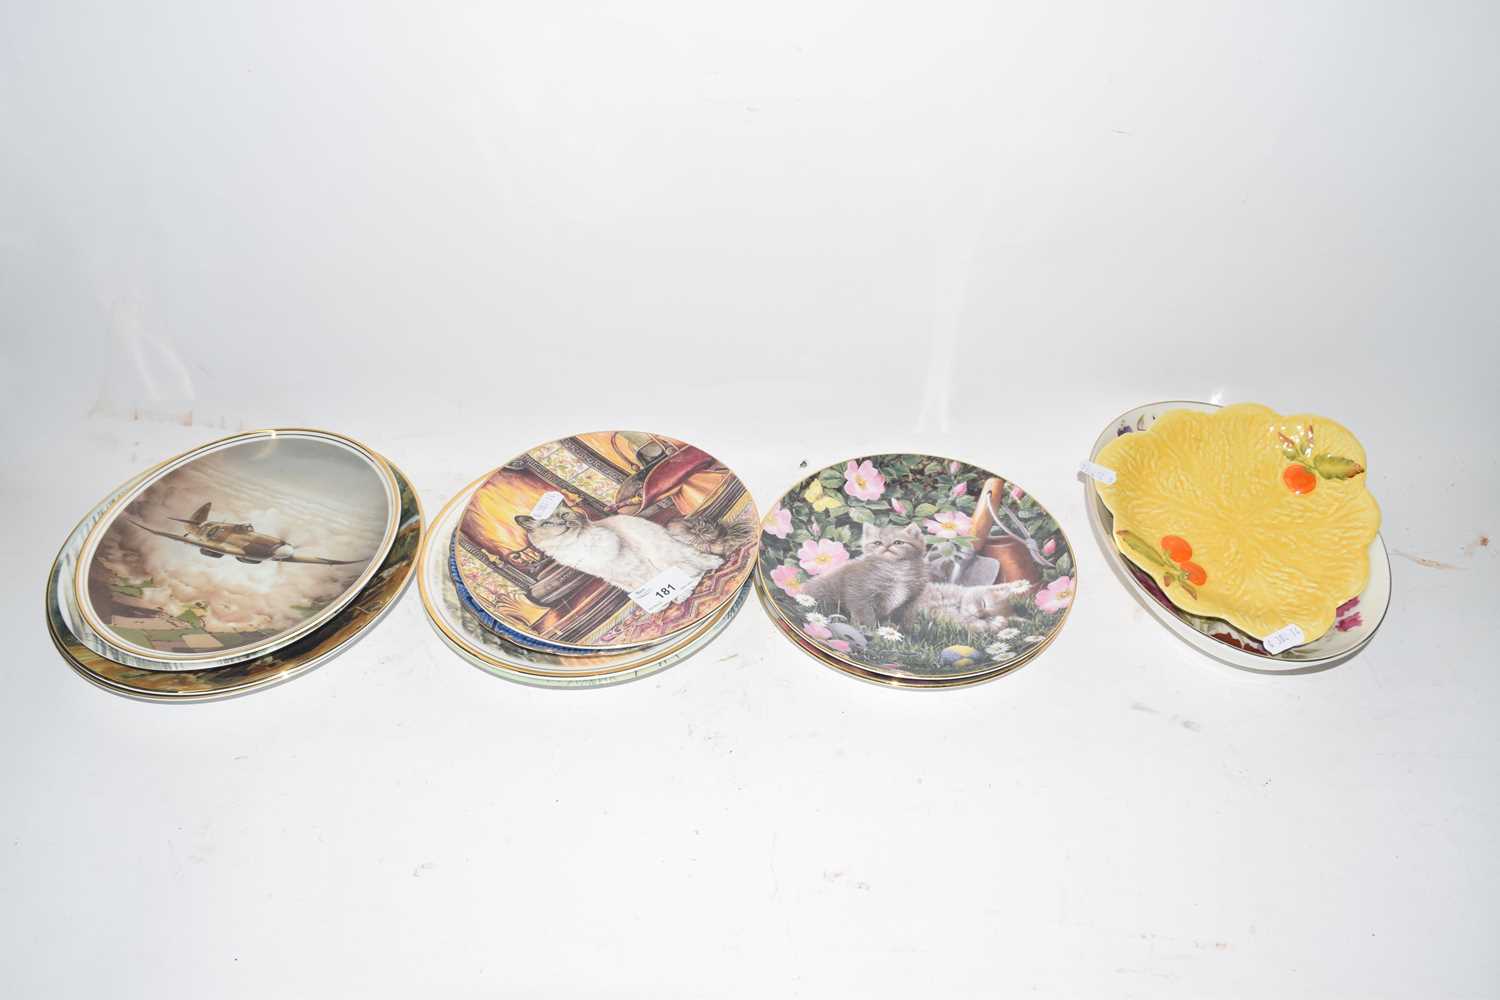 Collection of various decorative plates and bowls